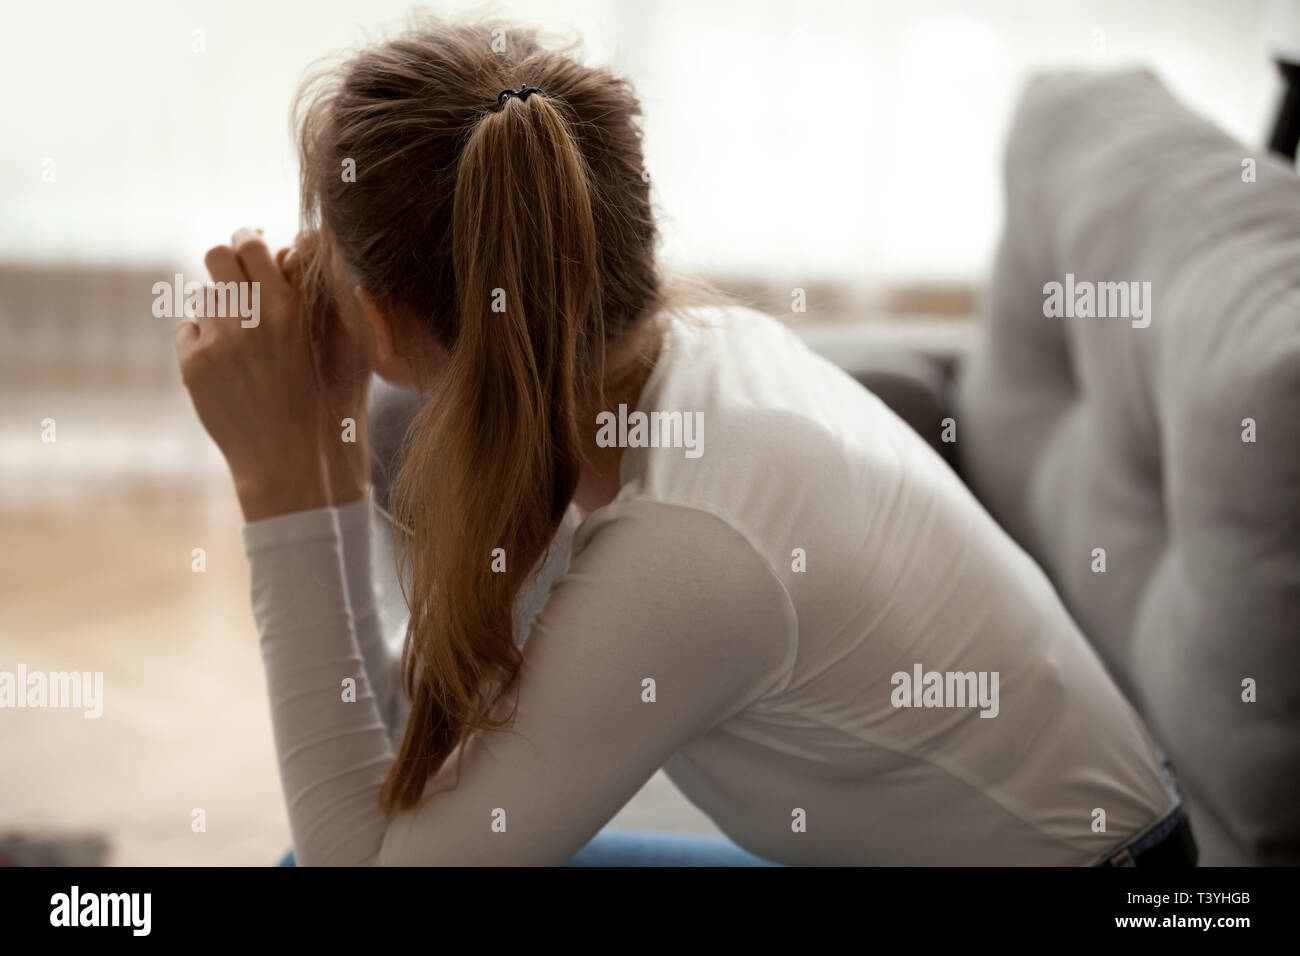 Rear view pensive thoughtful woman sitting on sofa, lost in thoughts Stock Photo